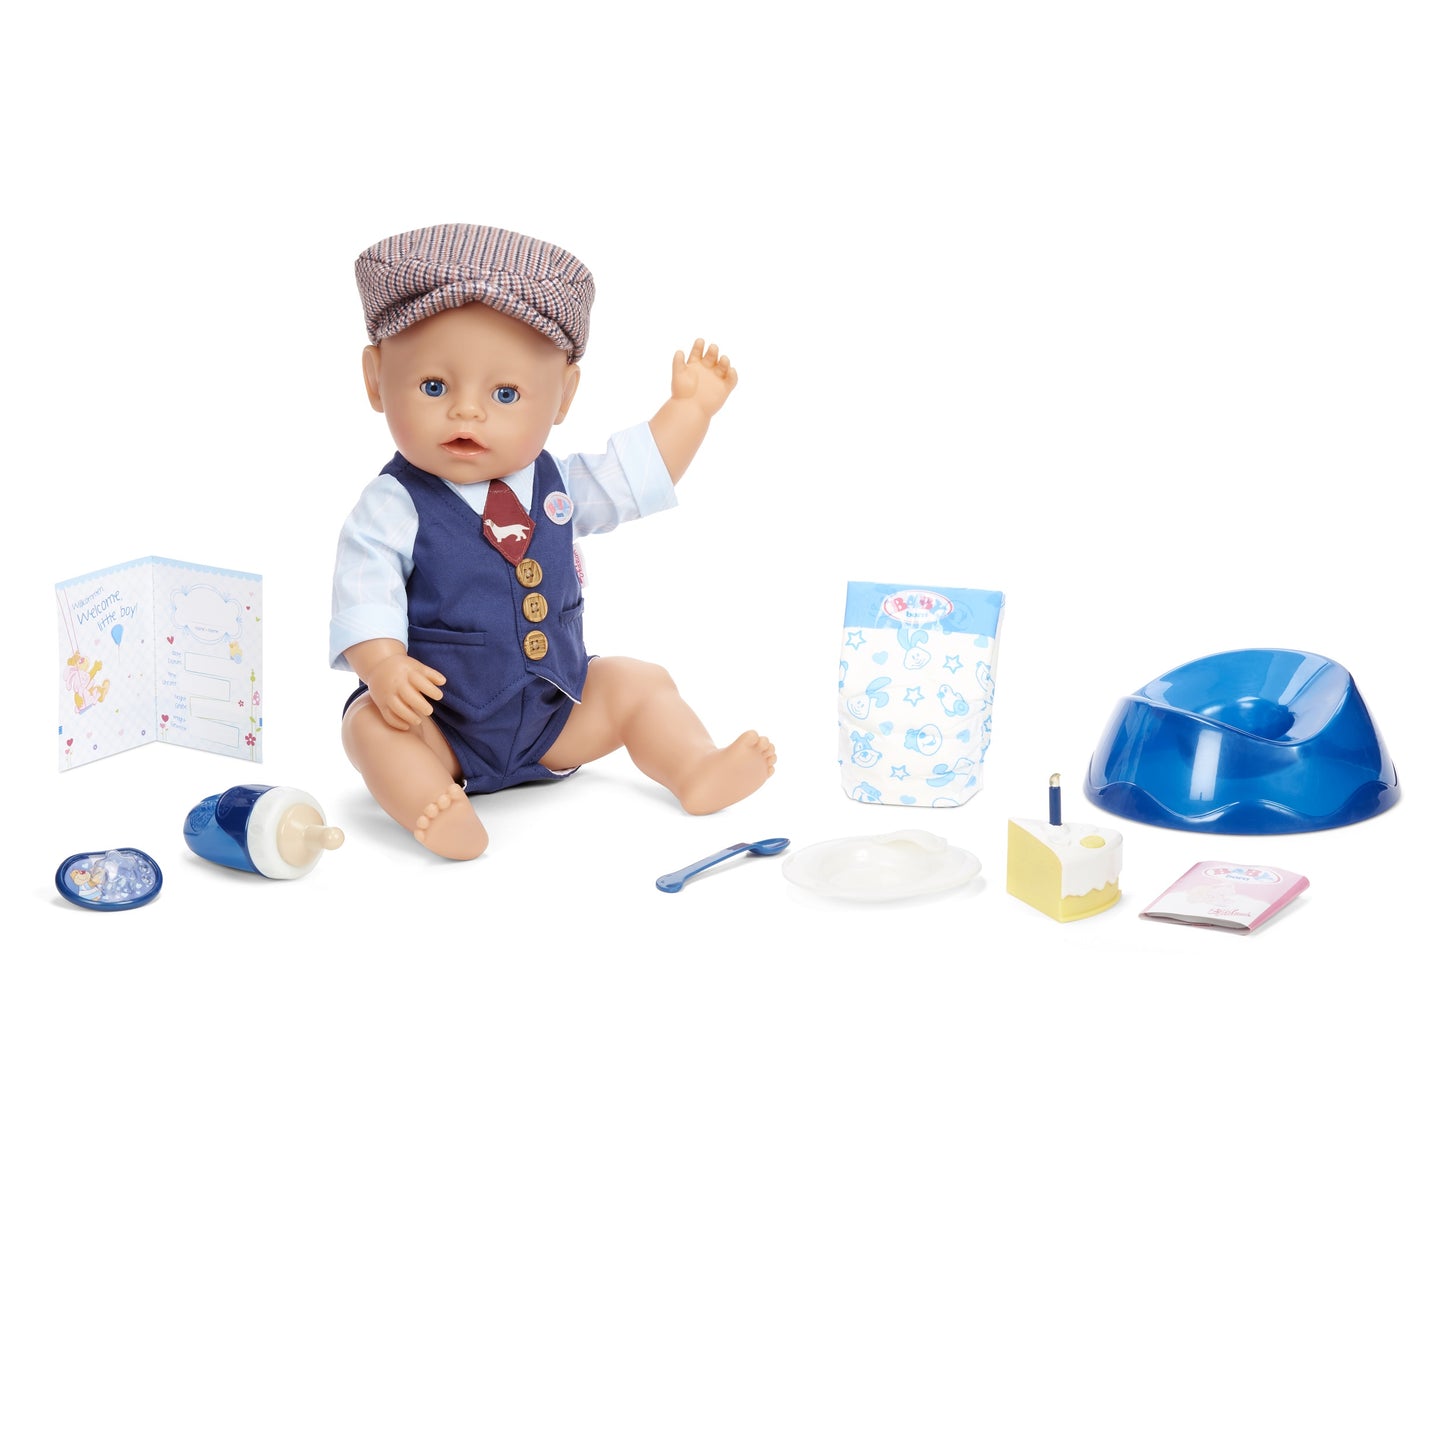 BABY born Interactive Boy Baby Doll Party Theme – Blue Eyes with 9 Ways to Nurture (Eats, Drinks, Cries, Sleeps, Bathes, and Wets)